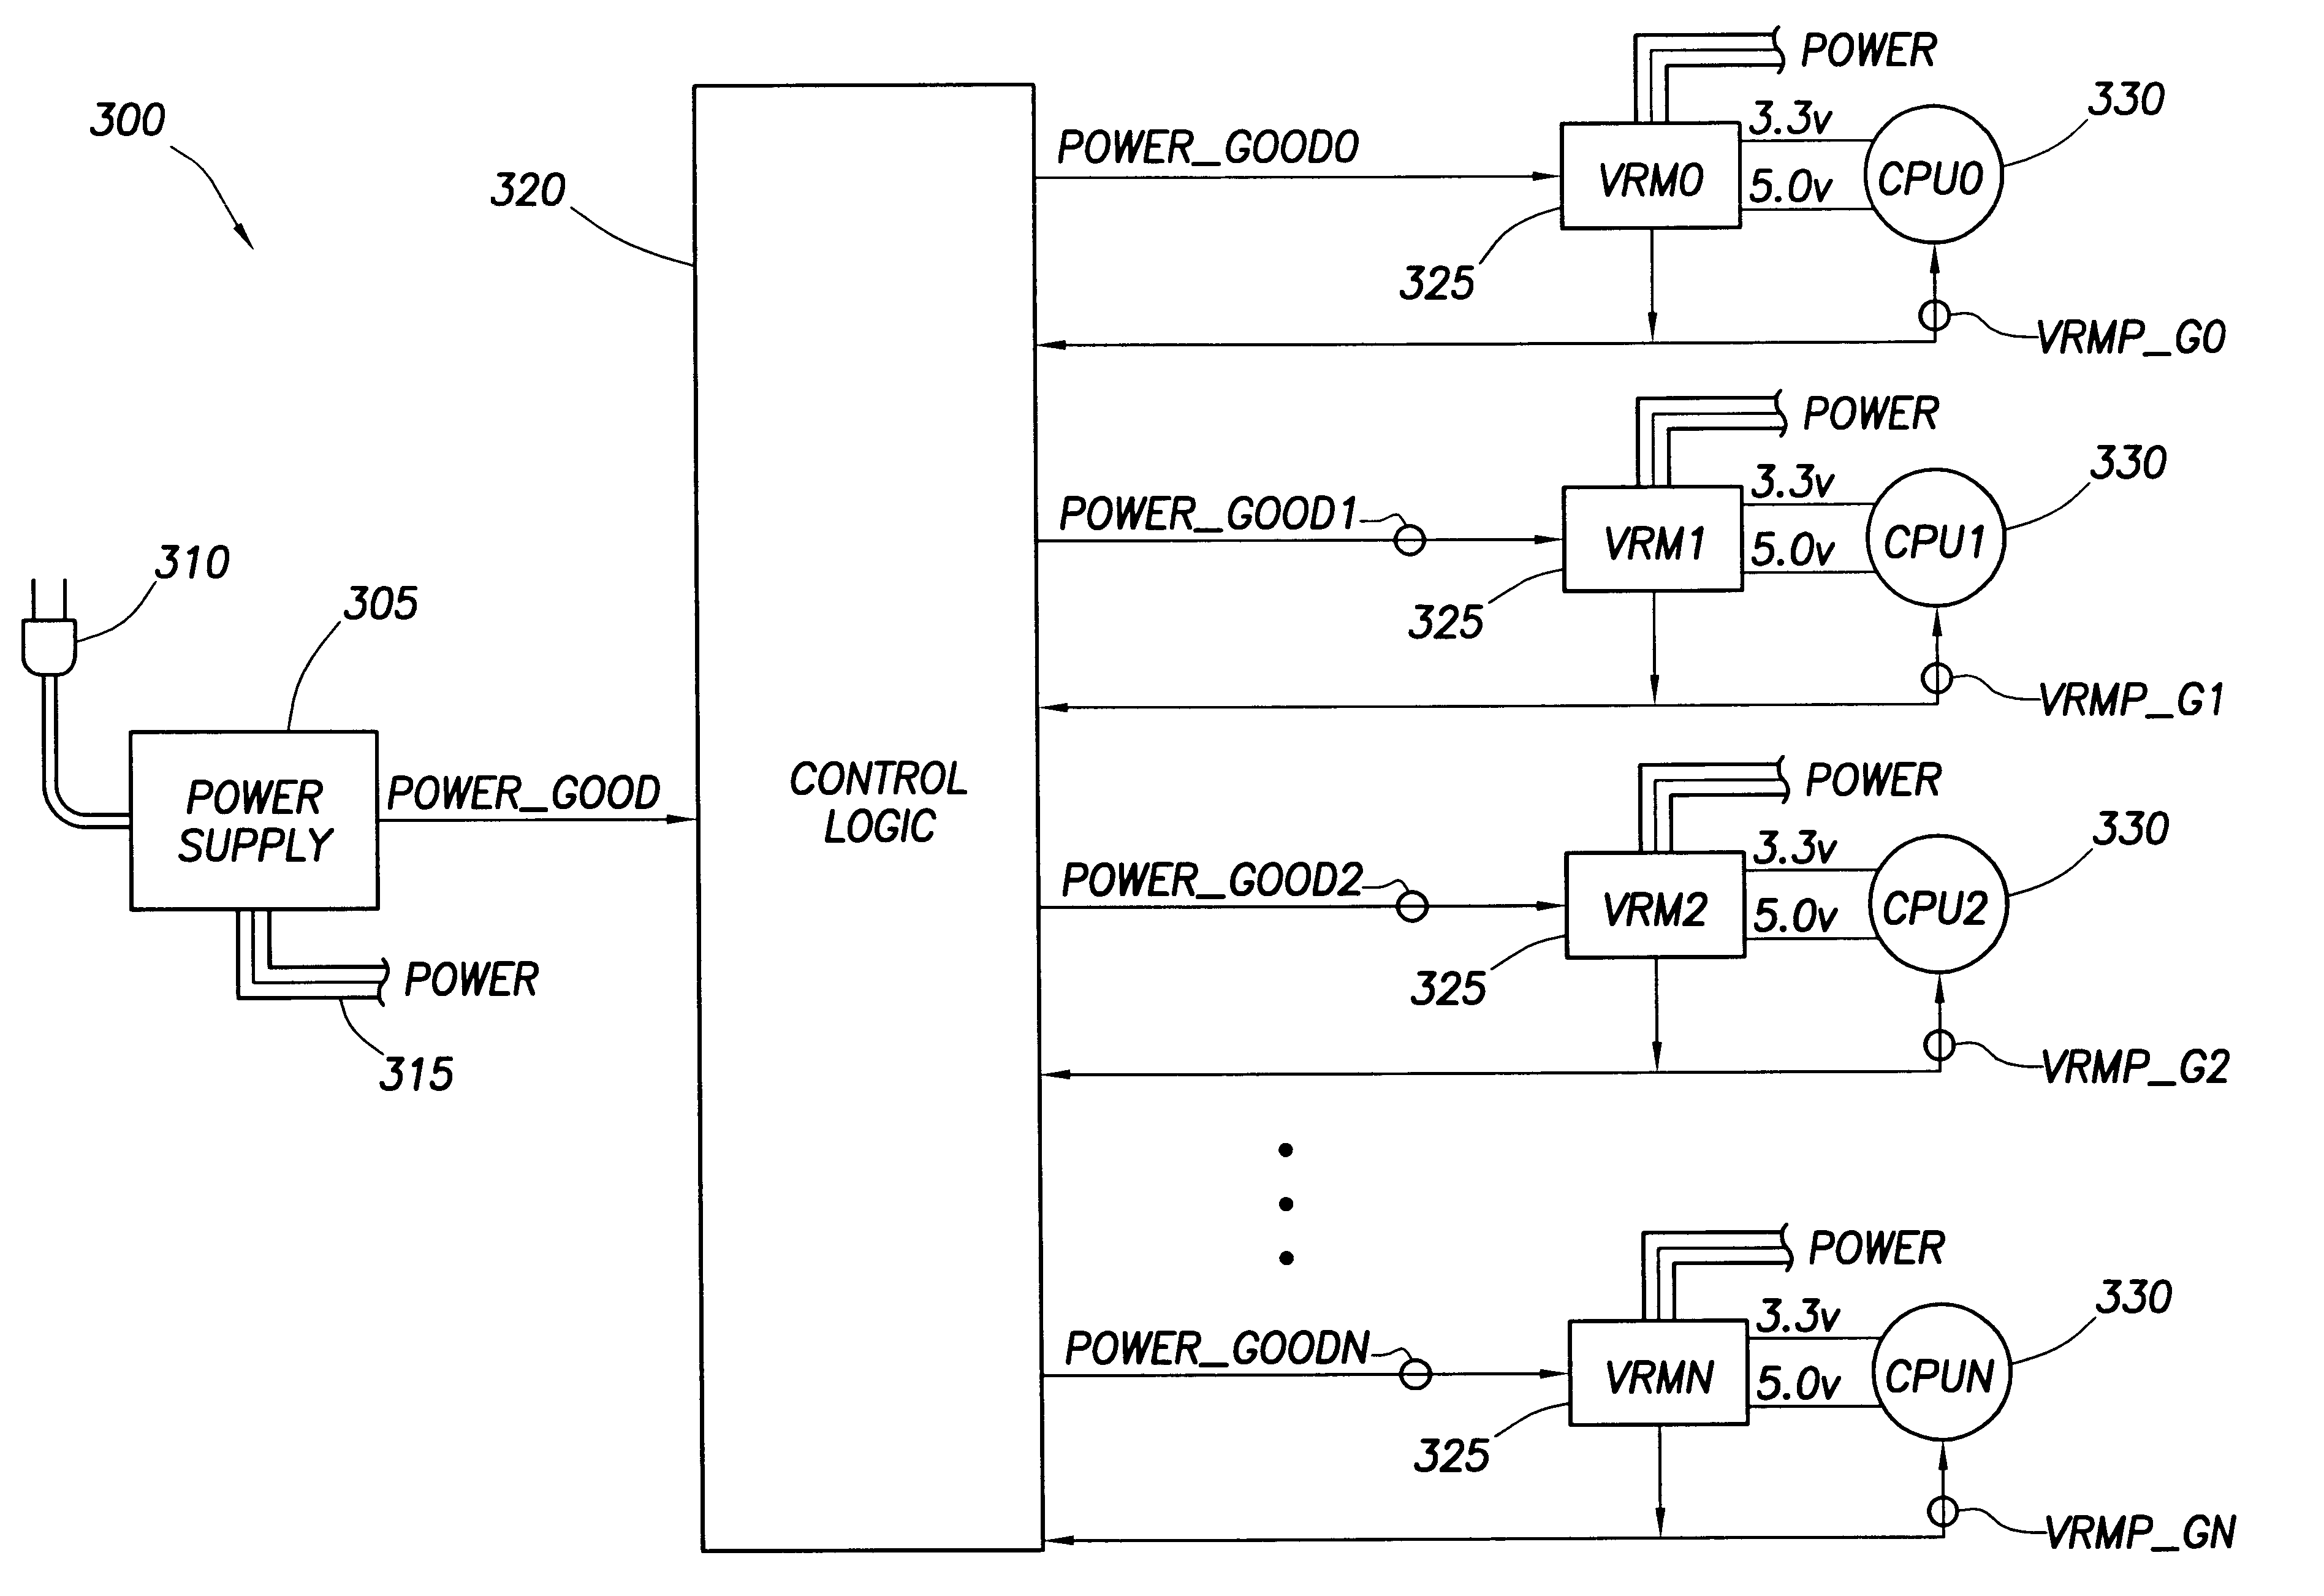 CPU power sequence for large multiprocessor systems